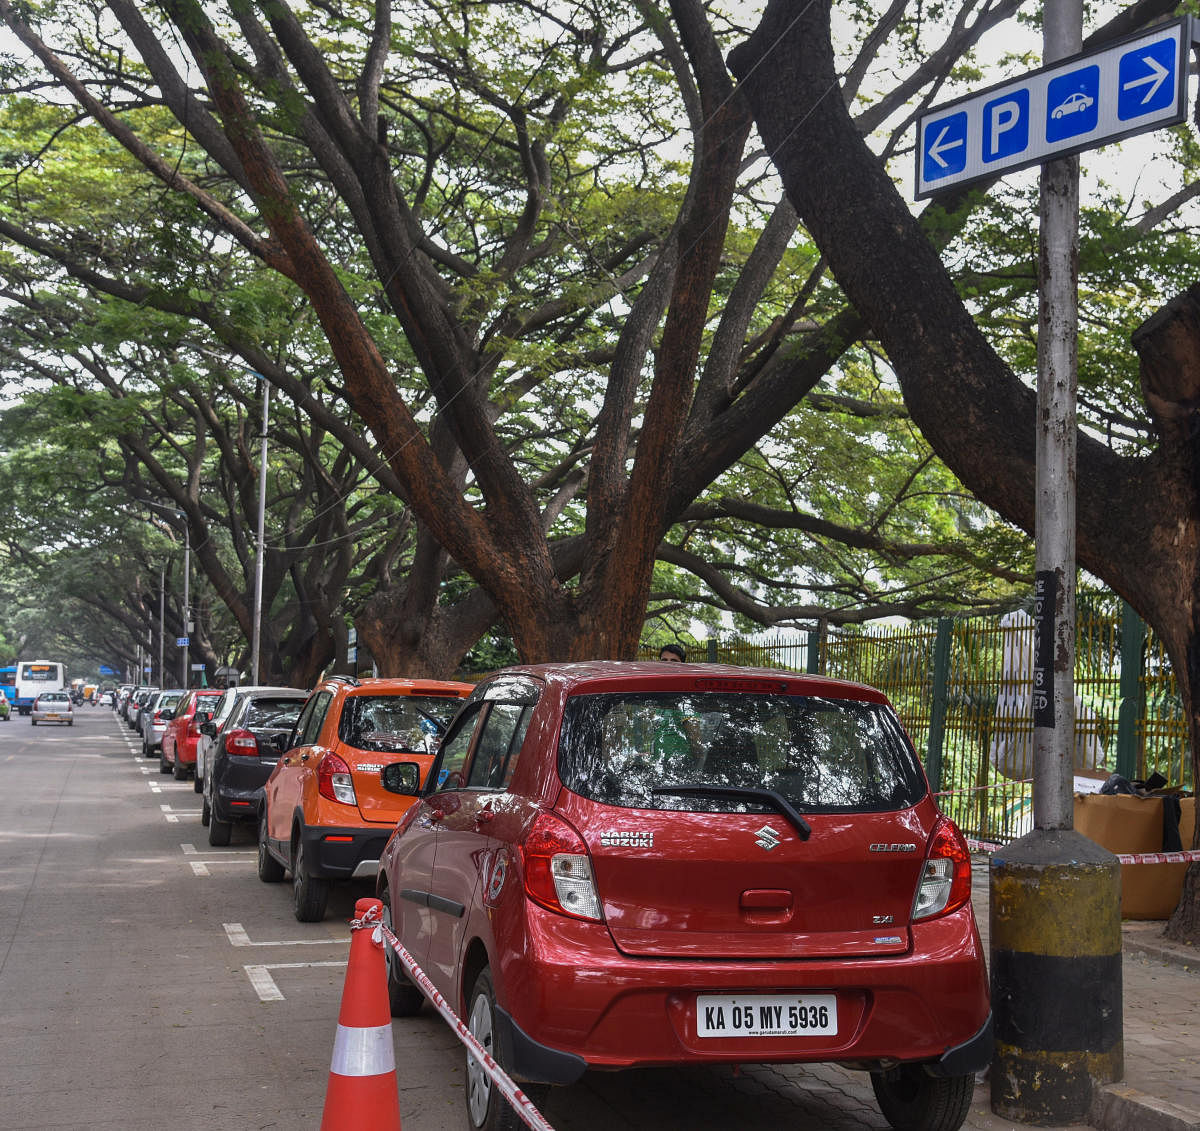 Smart Car Parking trail work is going on by BBMP maintain by Central Parking Services at Kasturba Road in Bengaluru on Saturday. (Photo by S K Dinesh)